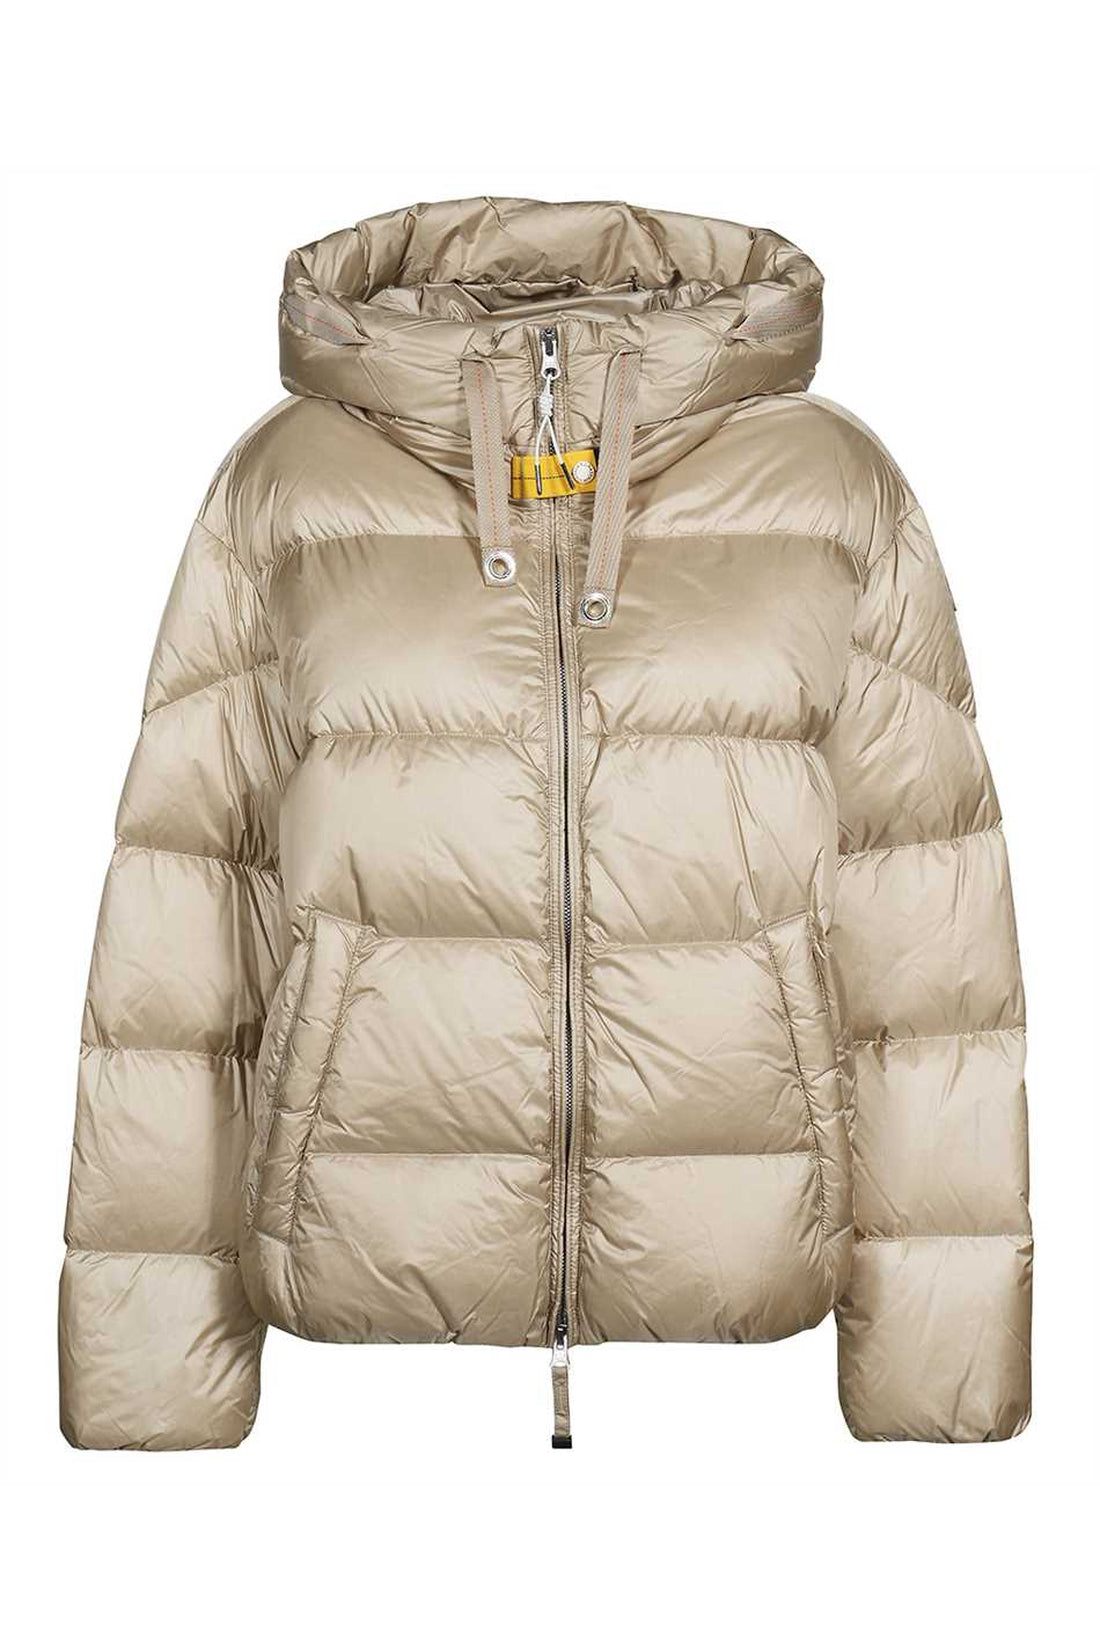 Parajumpers-OUTLET-SALE-Tilly hooded down jacket-ARCHIVIST